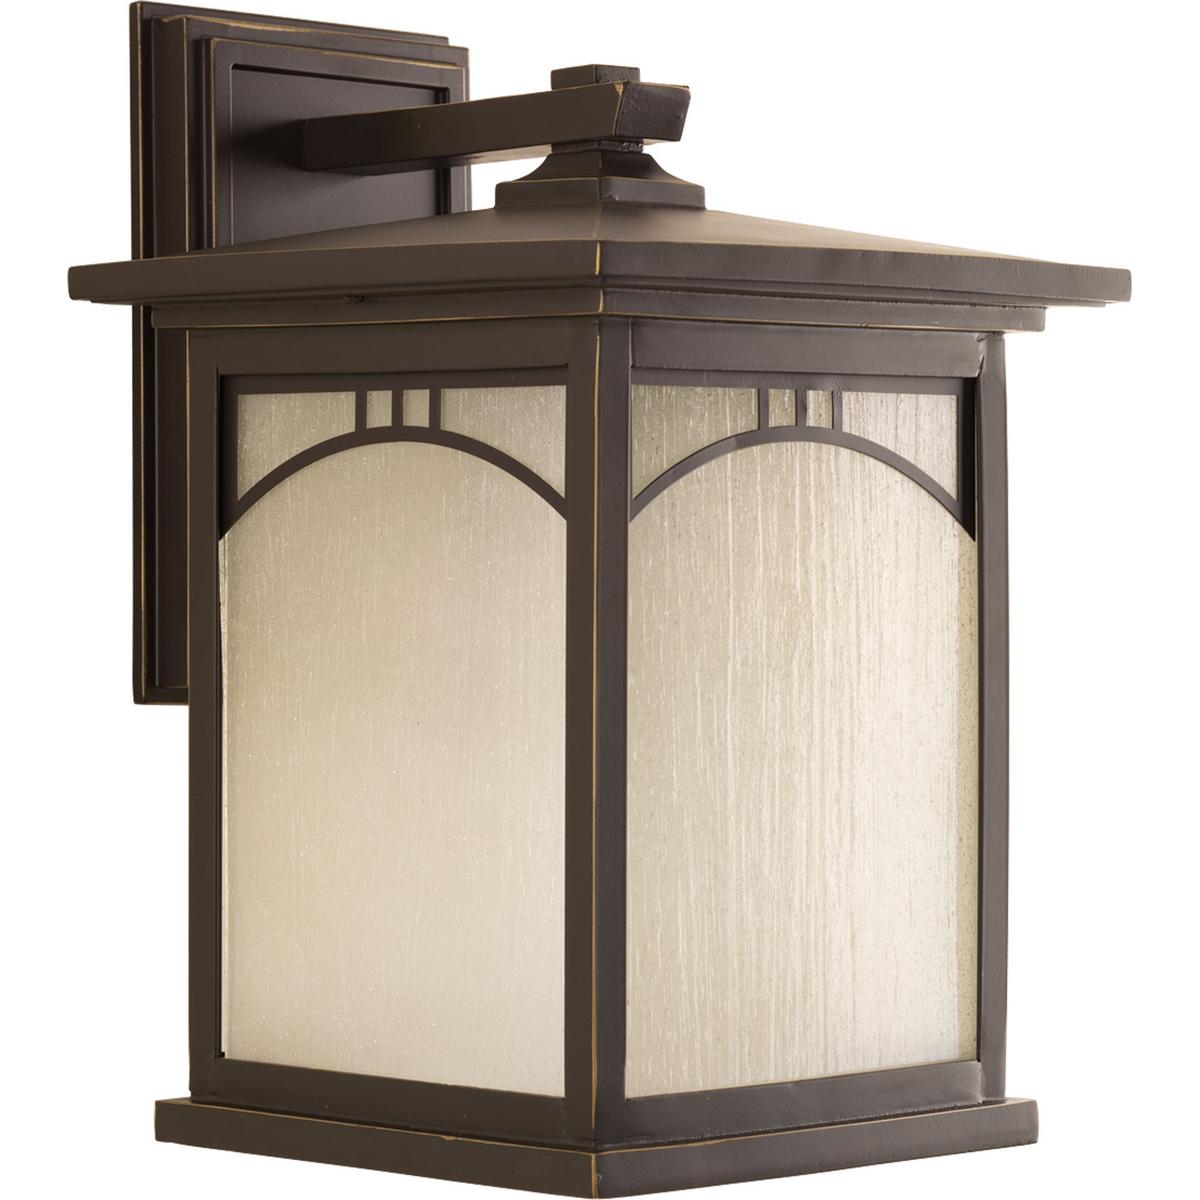 Hubbell P6054-20 Outdoor one-light large wall lantern with geometric details, umber textured art glass, and an Antique Bronze finish.  ; Antique bronze finish. ; Umber textured art glass panels. ; Geometric details.